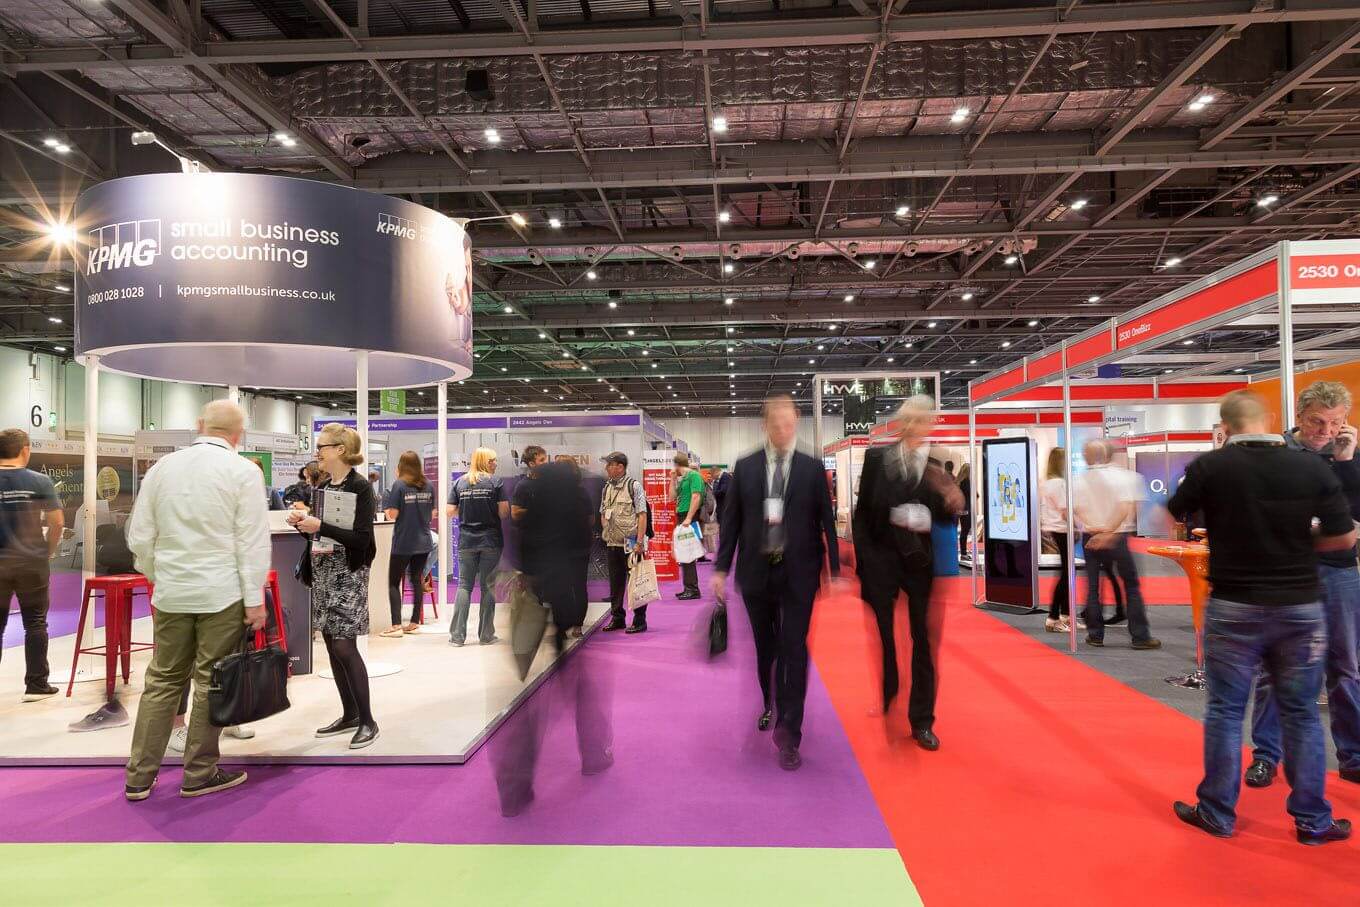 Event photography of The Business Show at ExCel London taken with slow shutterspeed setting